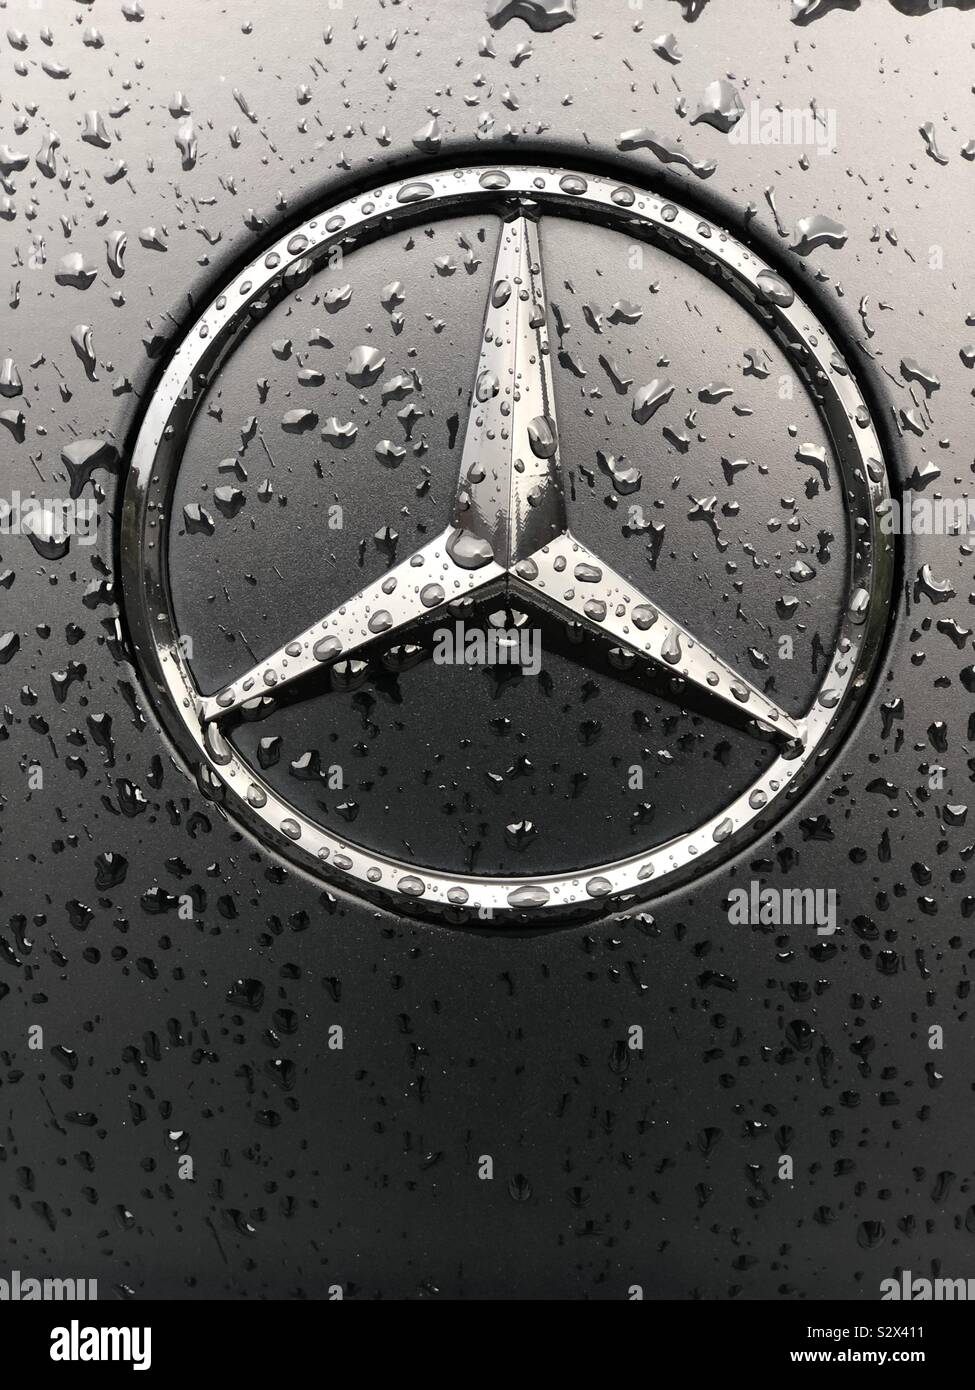 Mercedes Benz Car Logo High Resolution Stock Photography And Images Alamy